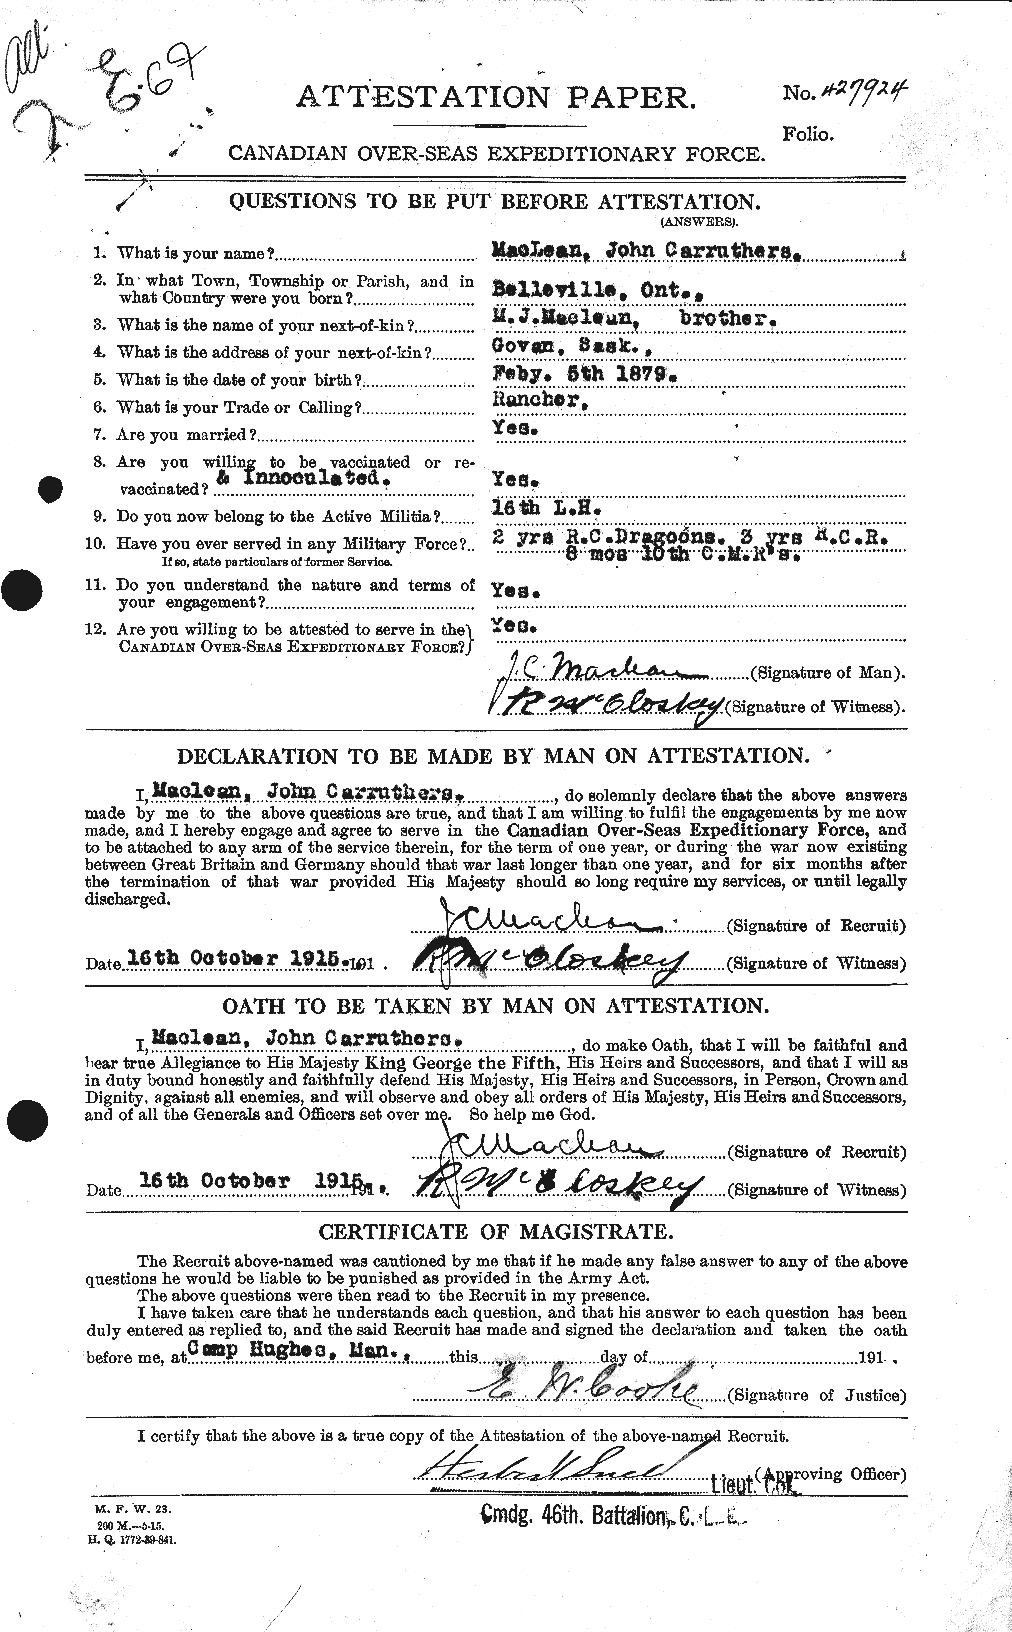 Personnel Records of the First World War - CEF 531803a